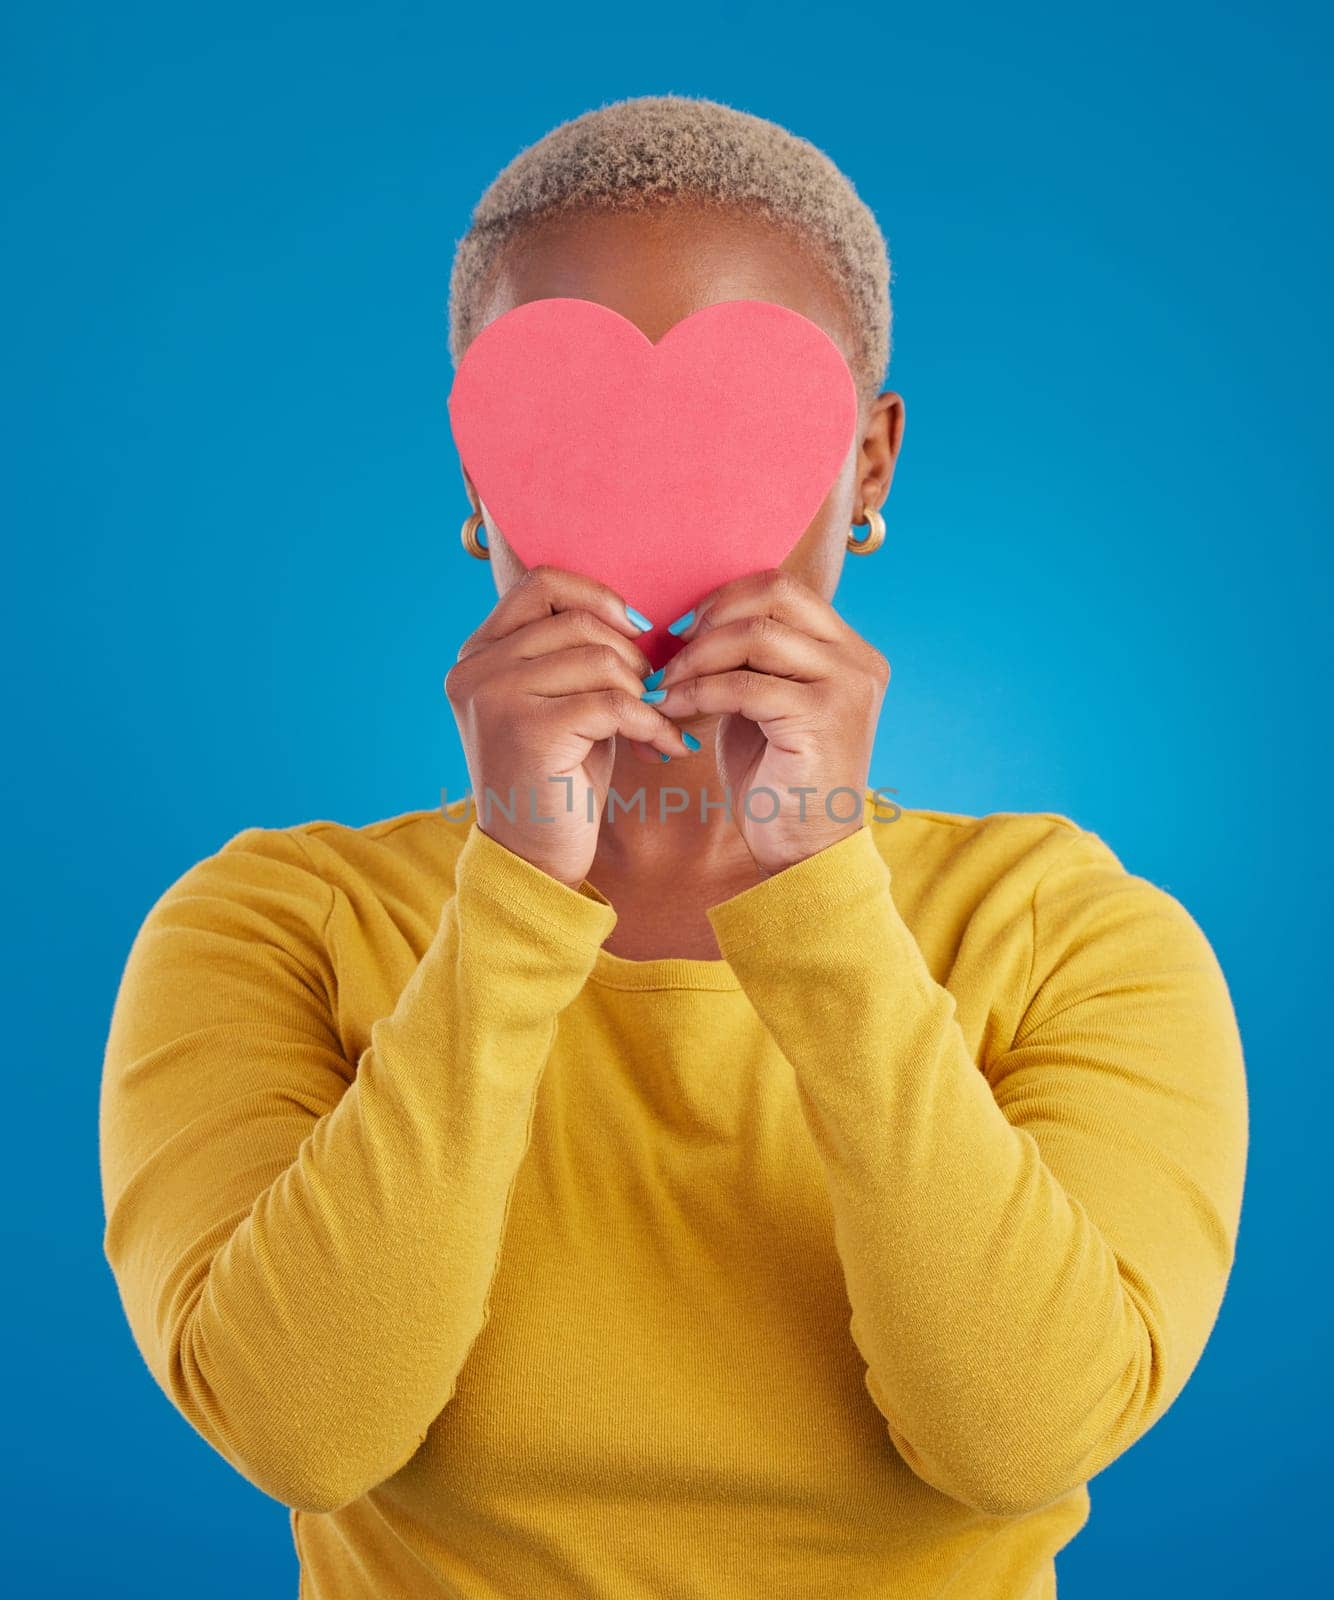 Paper, heart and hide with black woman in studio for love, date and kindness. Invitation, romance and feelings with female and shape isolated on blue background for emotion, support and affectionate.